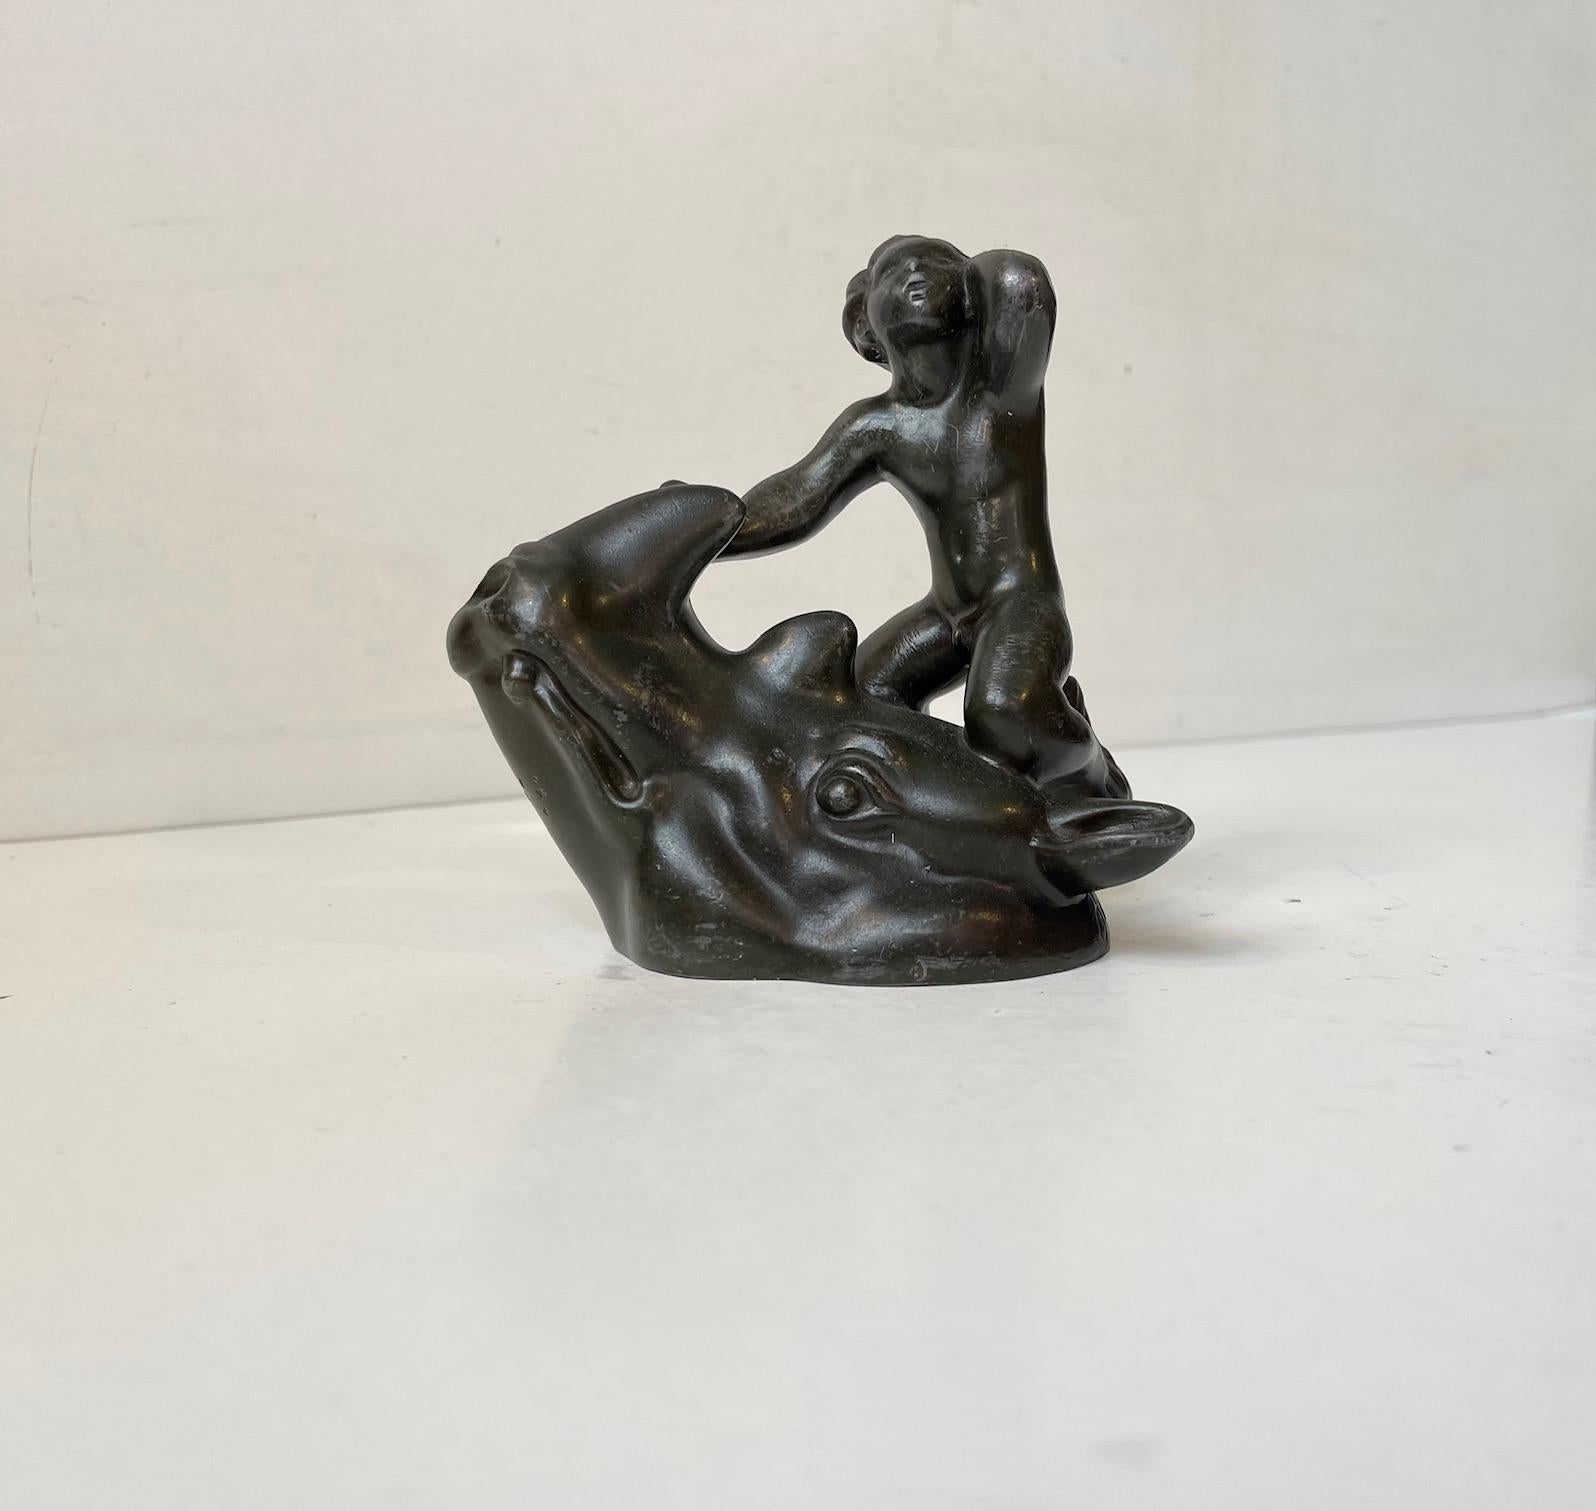 Mythologically perceived small group figurine with faun and rino by Just Andersen, Denmark. Designed and made around 1930. Composed of Just Andersens own alloy called Disko Metal. The figurine is signed to the side: Just A. and marked, Just D 1632.